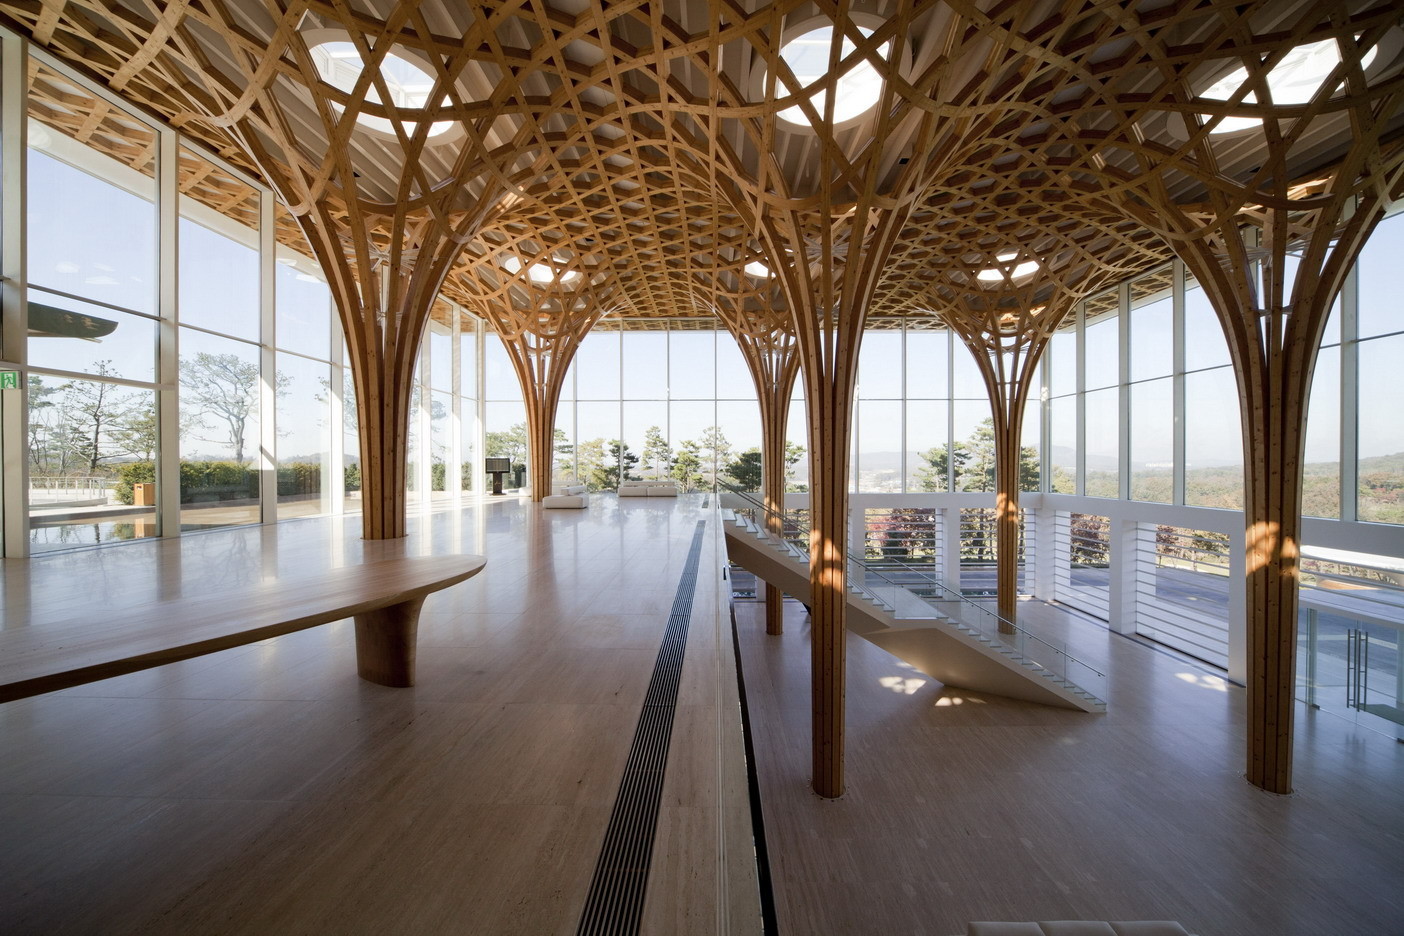 Shigeru Ban’s curved wooden structure for the Golf Club in Yeoju